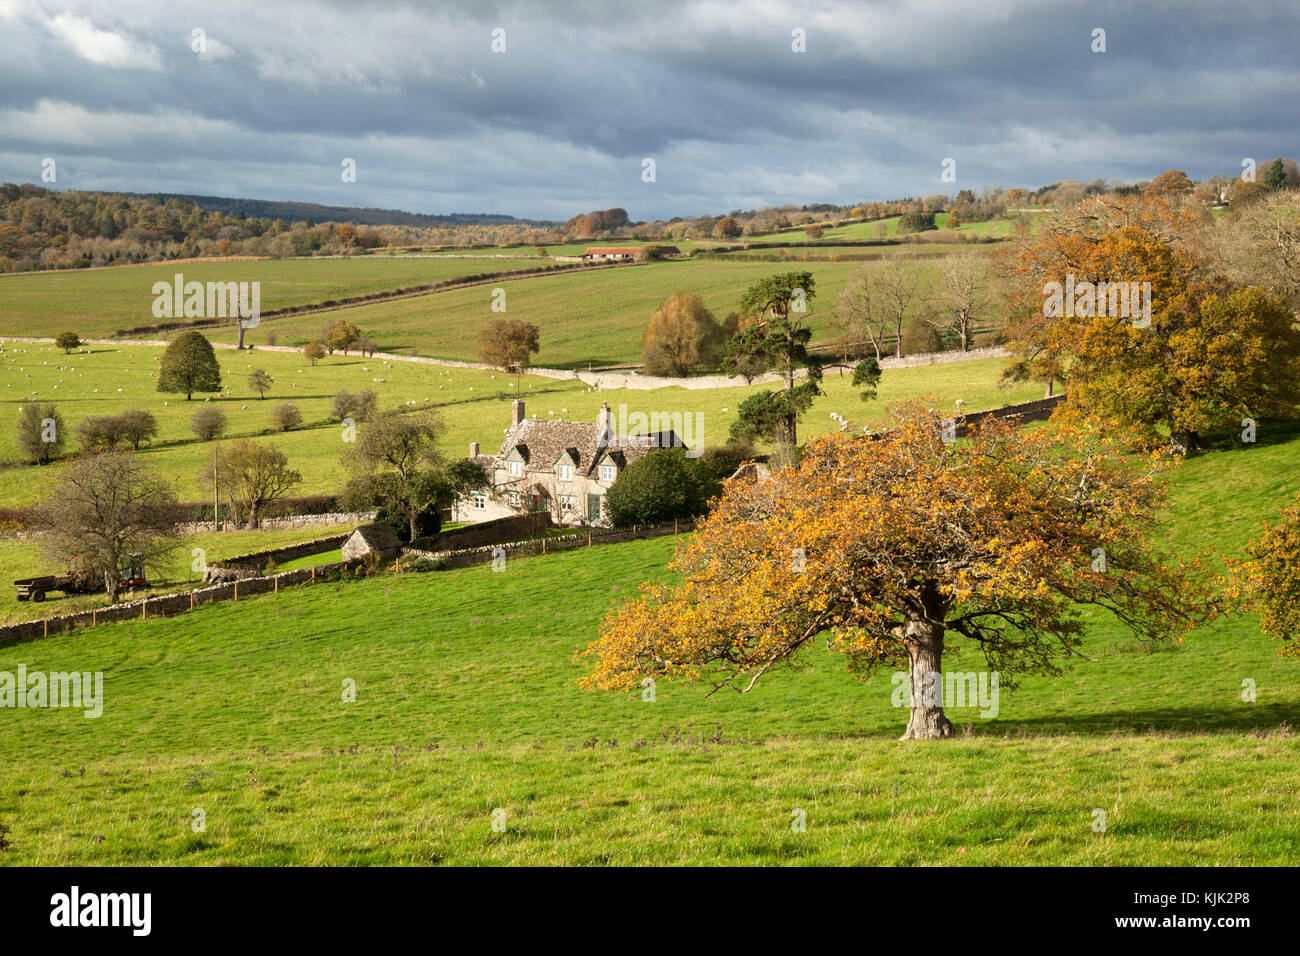 Cotswold stone farmhouse set in Cotswold landscape in autumn, Stowell, Cotswolds, Gloucestershire, England, United Kingdom, Europe Stock Photo